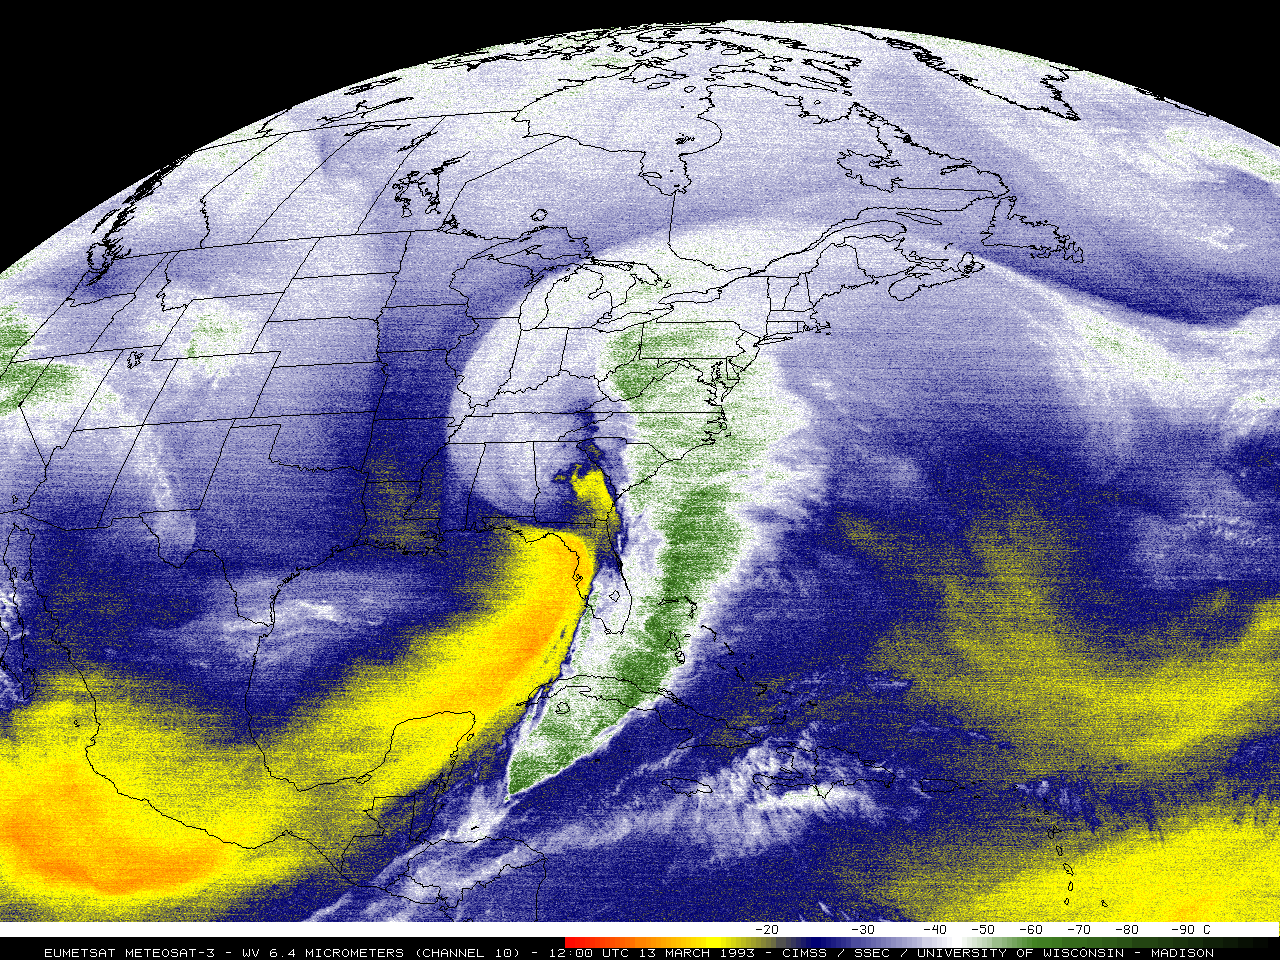 Meteosat-3 6.4 µm water vapor channel images (click image to play animation)